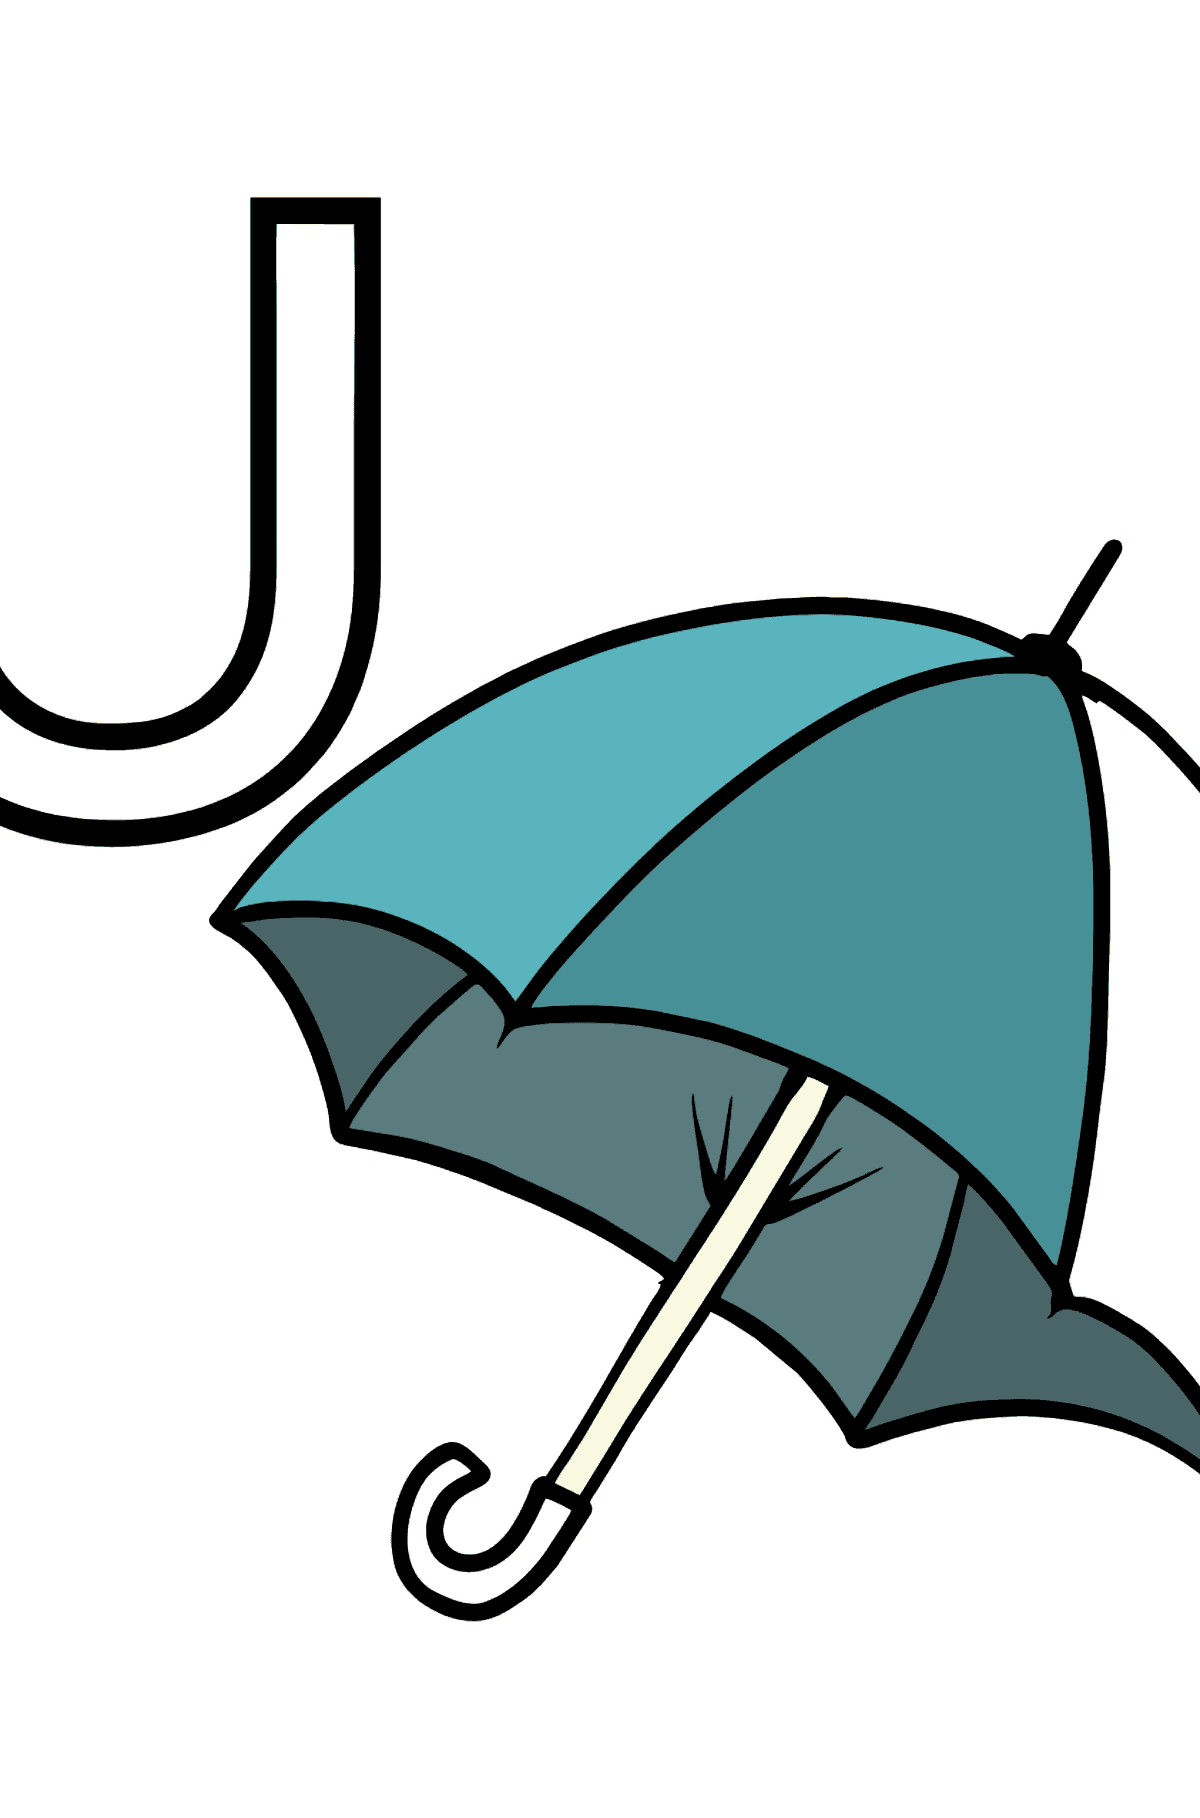 English Letter U coloring pages - UMBRELLA - Coloring Pages for Kids